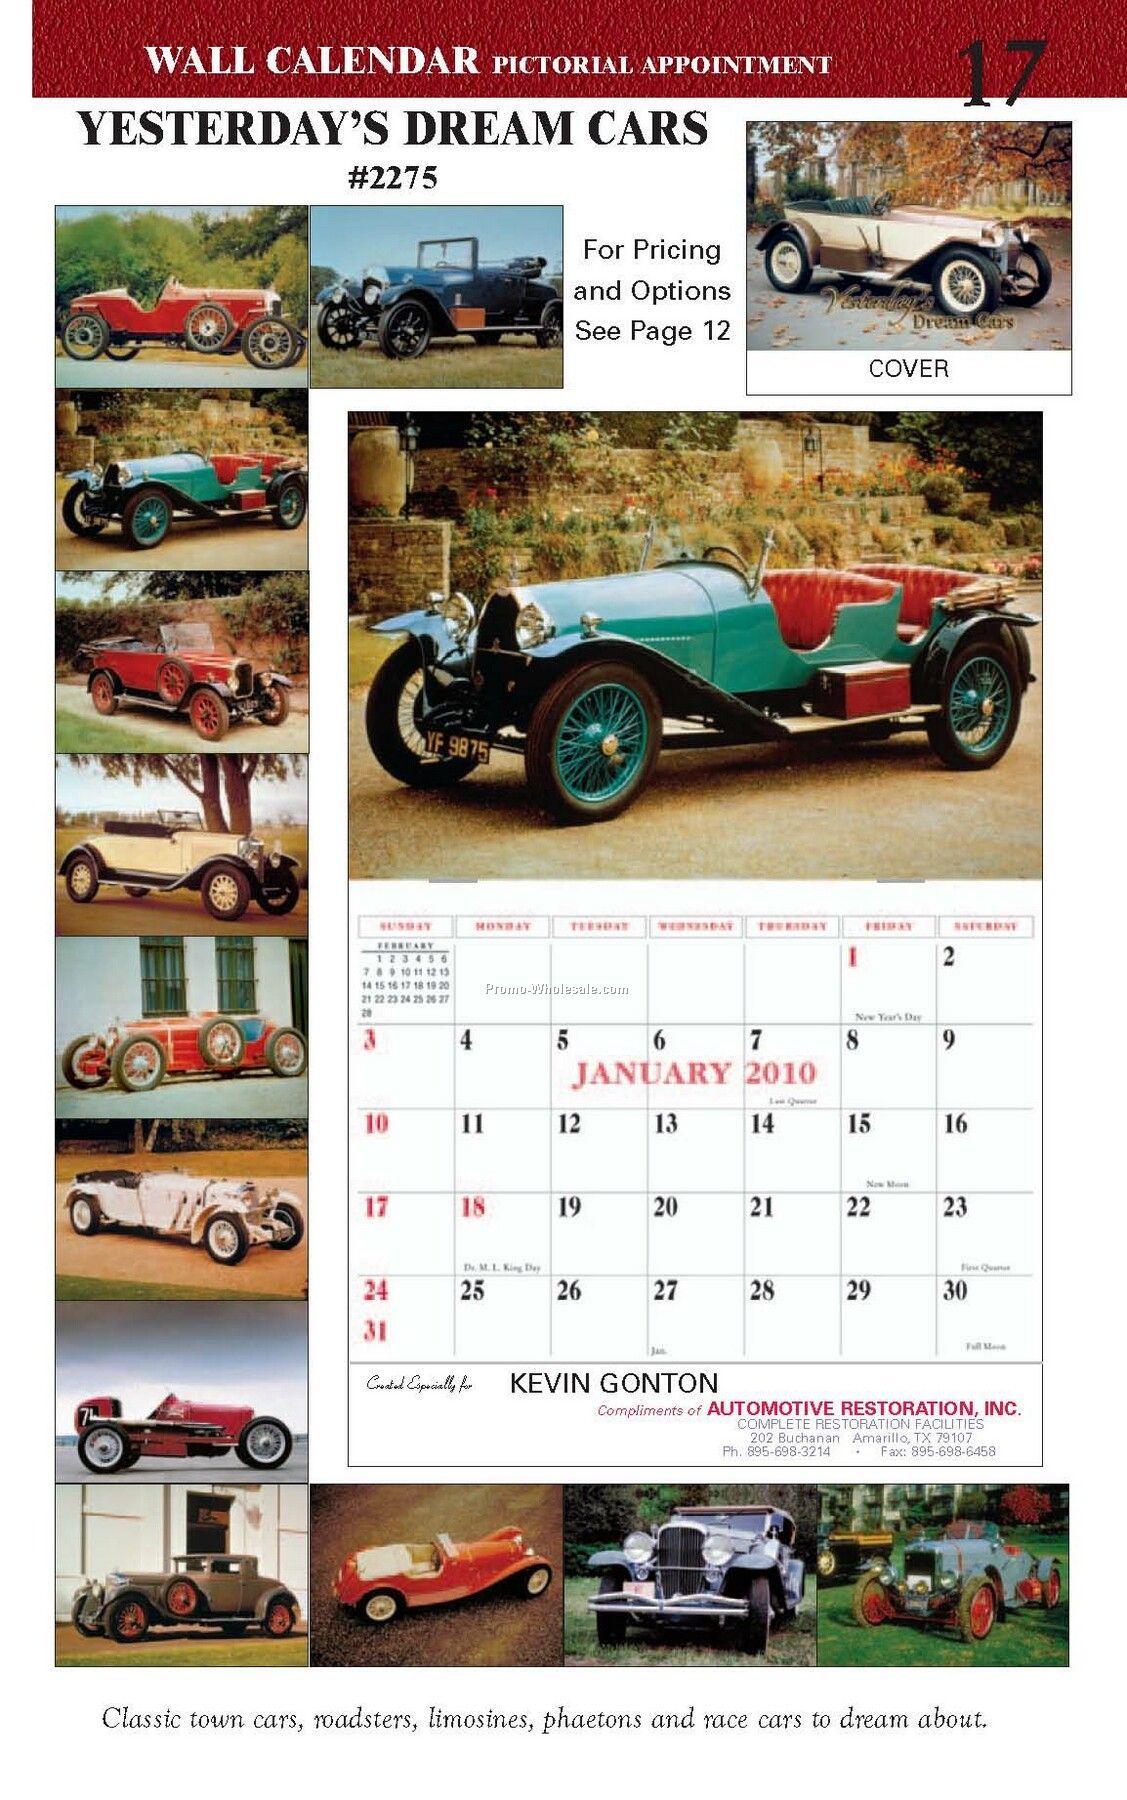 Wall Calendar: Yesterdays Dream Cars - Saddle Stitched